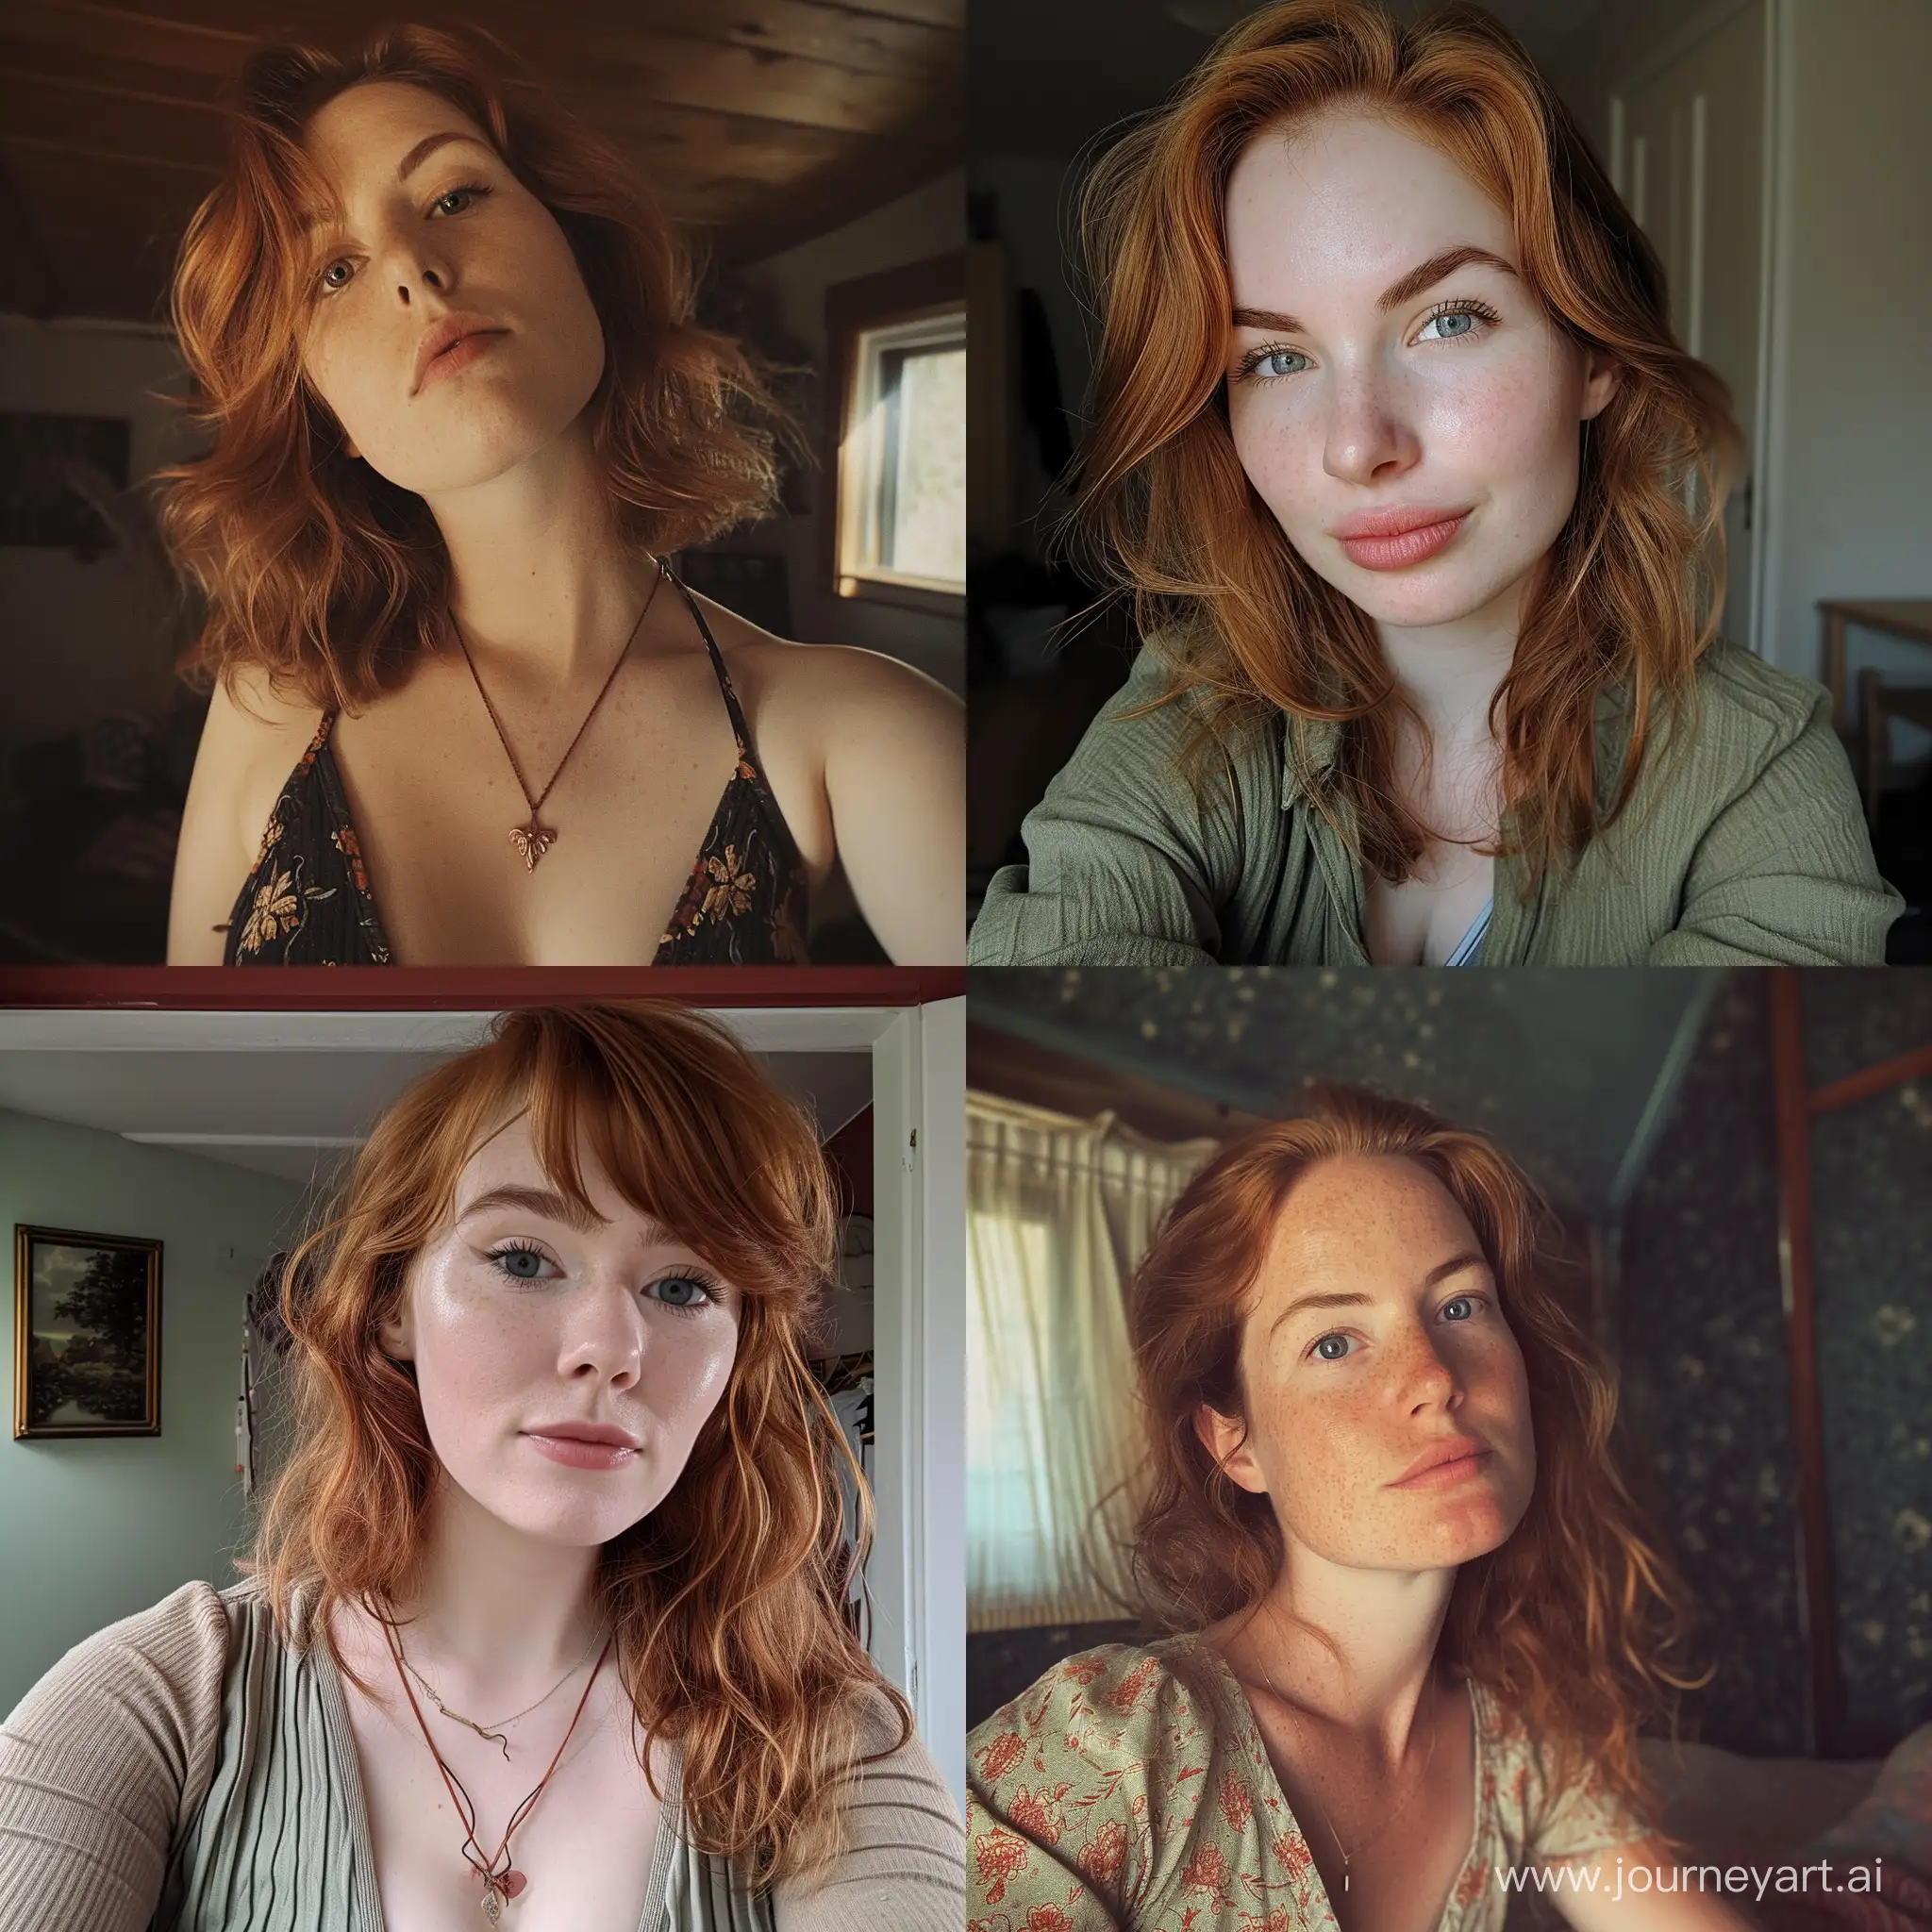 Redhead-Womans-Interior-Selfie-Captured-with-LowQuality-Phone-Camera